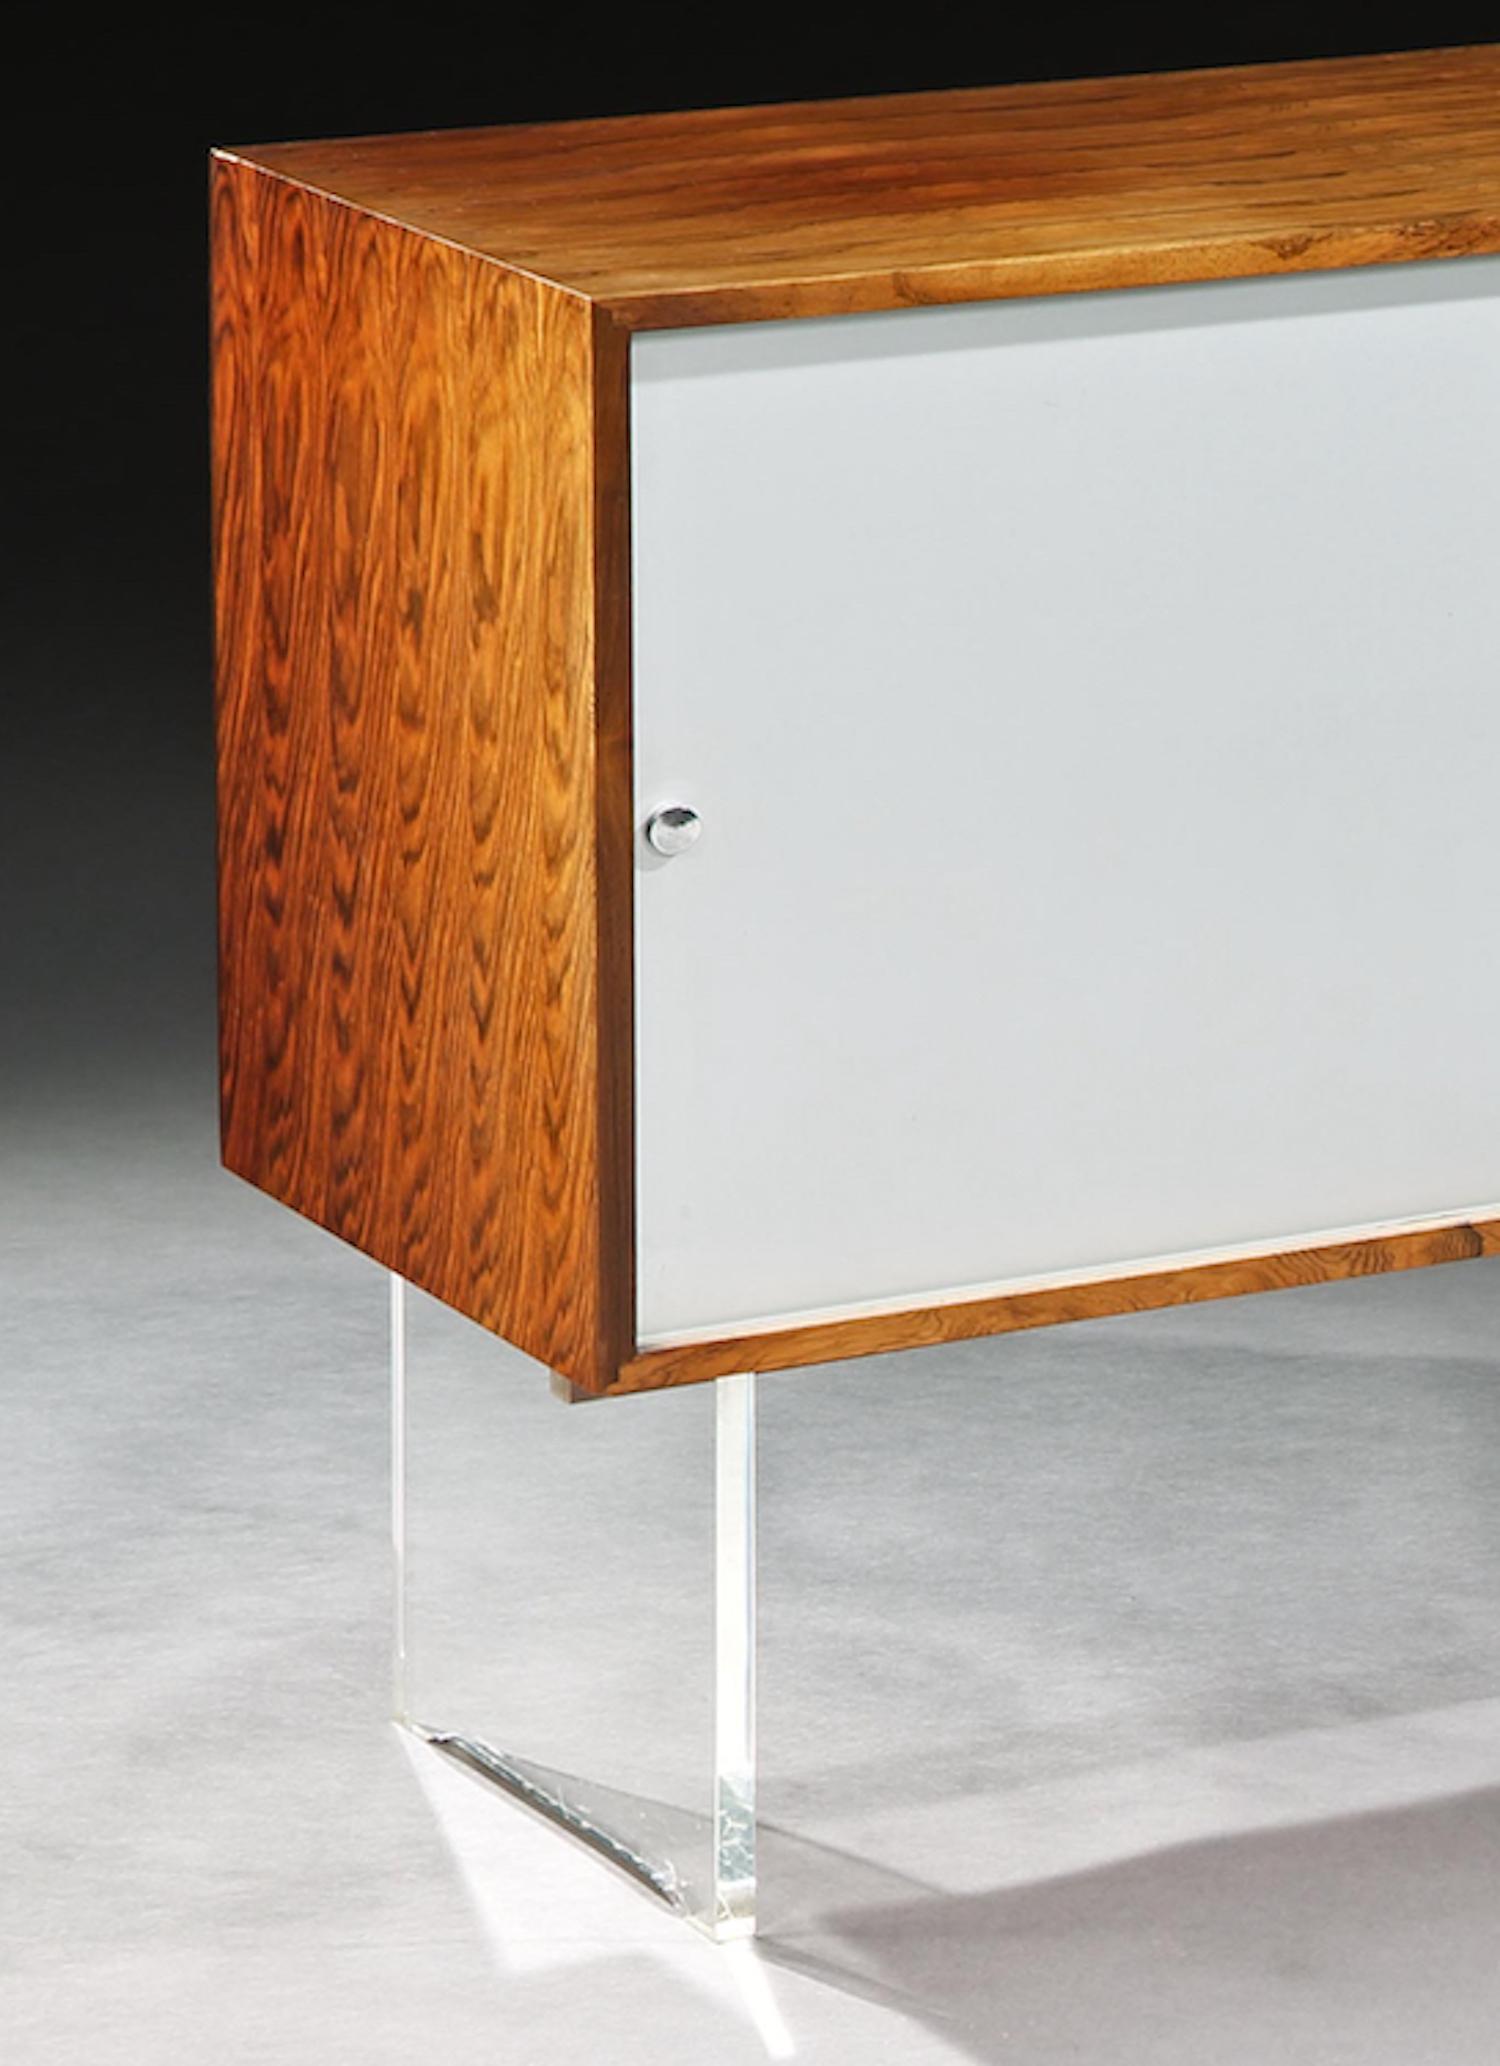 Joinery Cabinets, Pair, Poul Nørreklit, for Georg Petersens, Danish, Modern, 1970, 